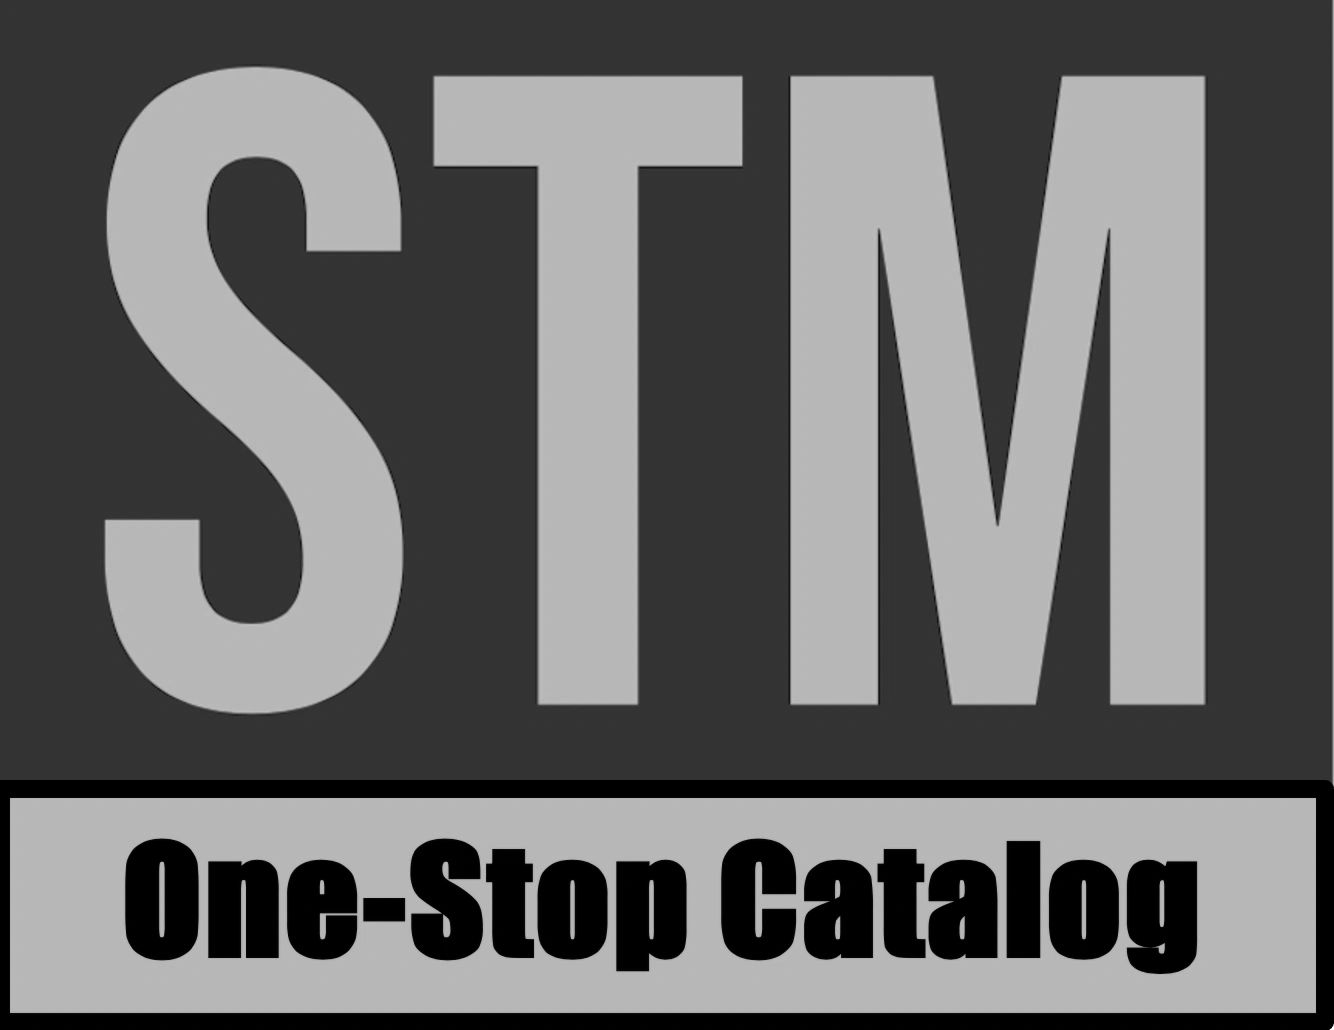 One-Stop Catalog, cinematic orchestral, songs, sync licensing